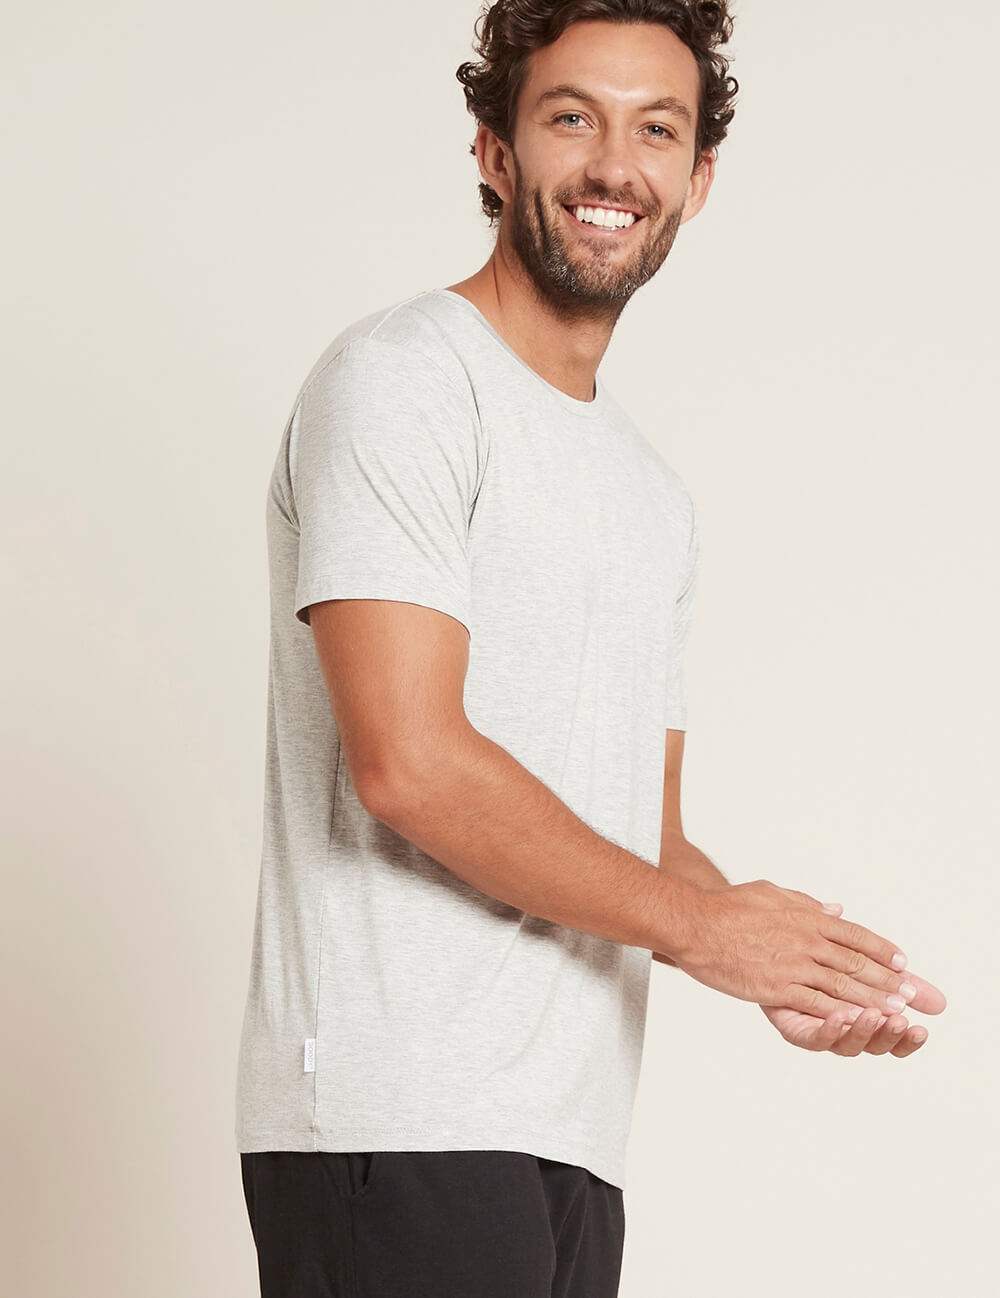 Boody Bamboo Mens Crew Neck Shirt in Light Grey Marl Side View